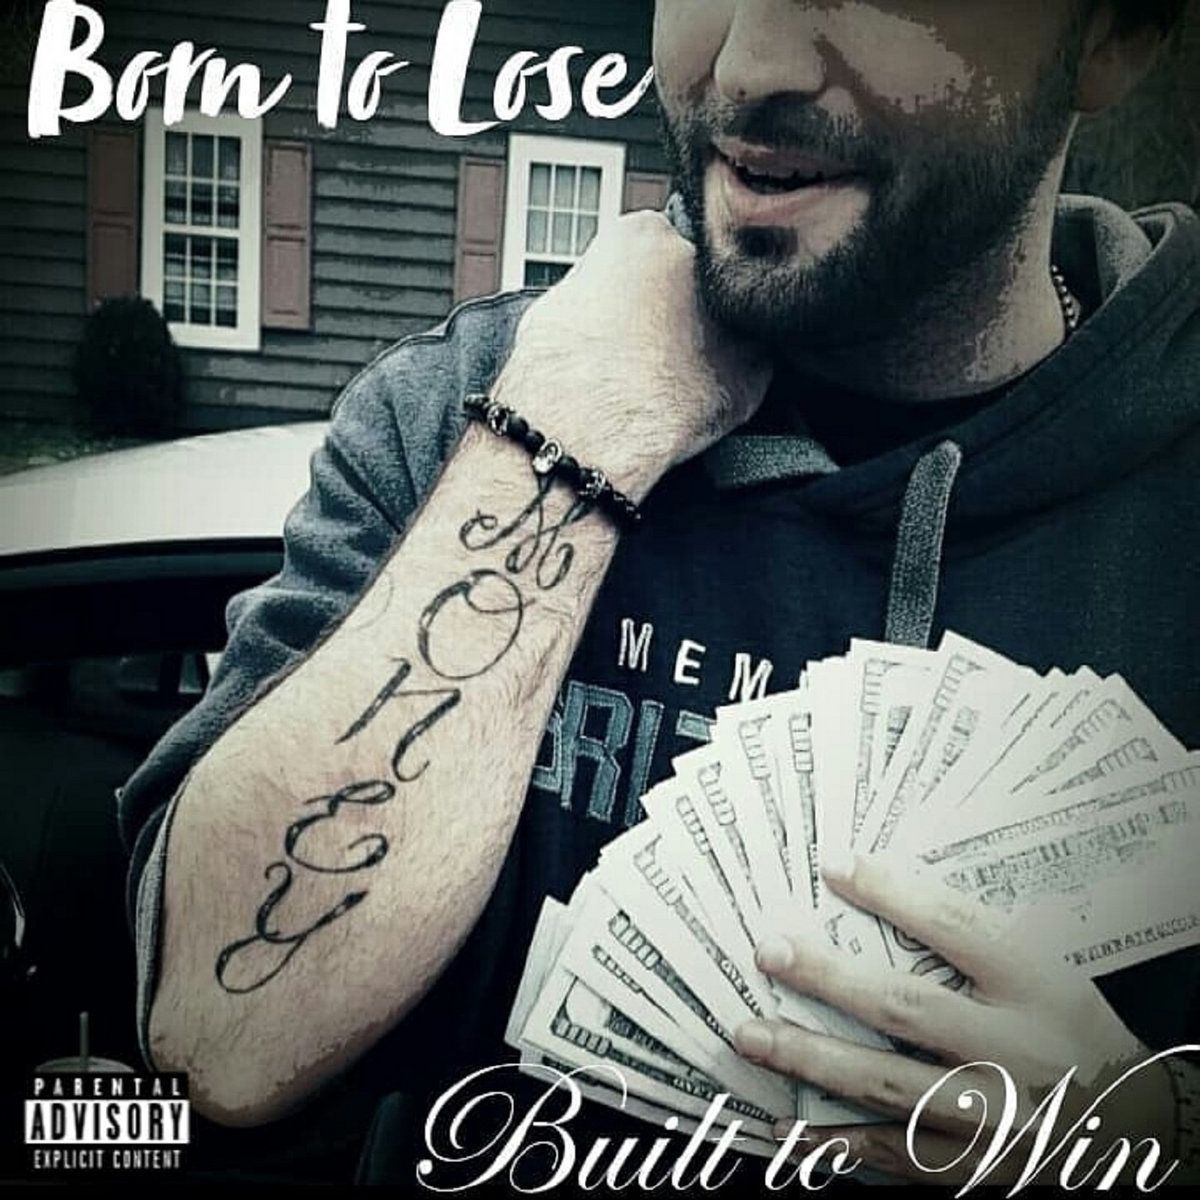 Snappie reccomend Born to lose built to win